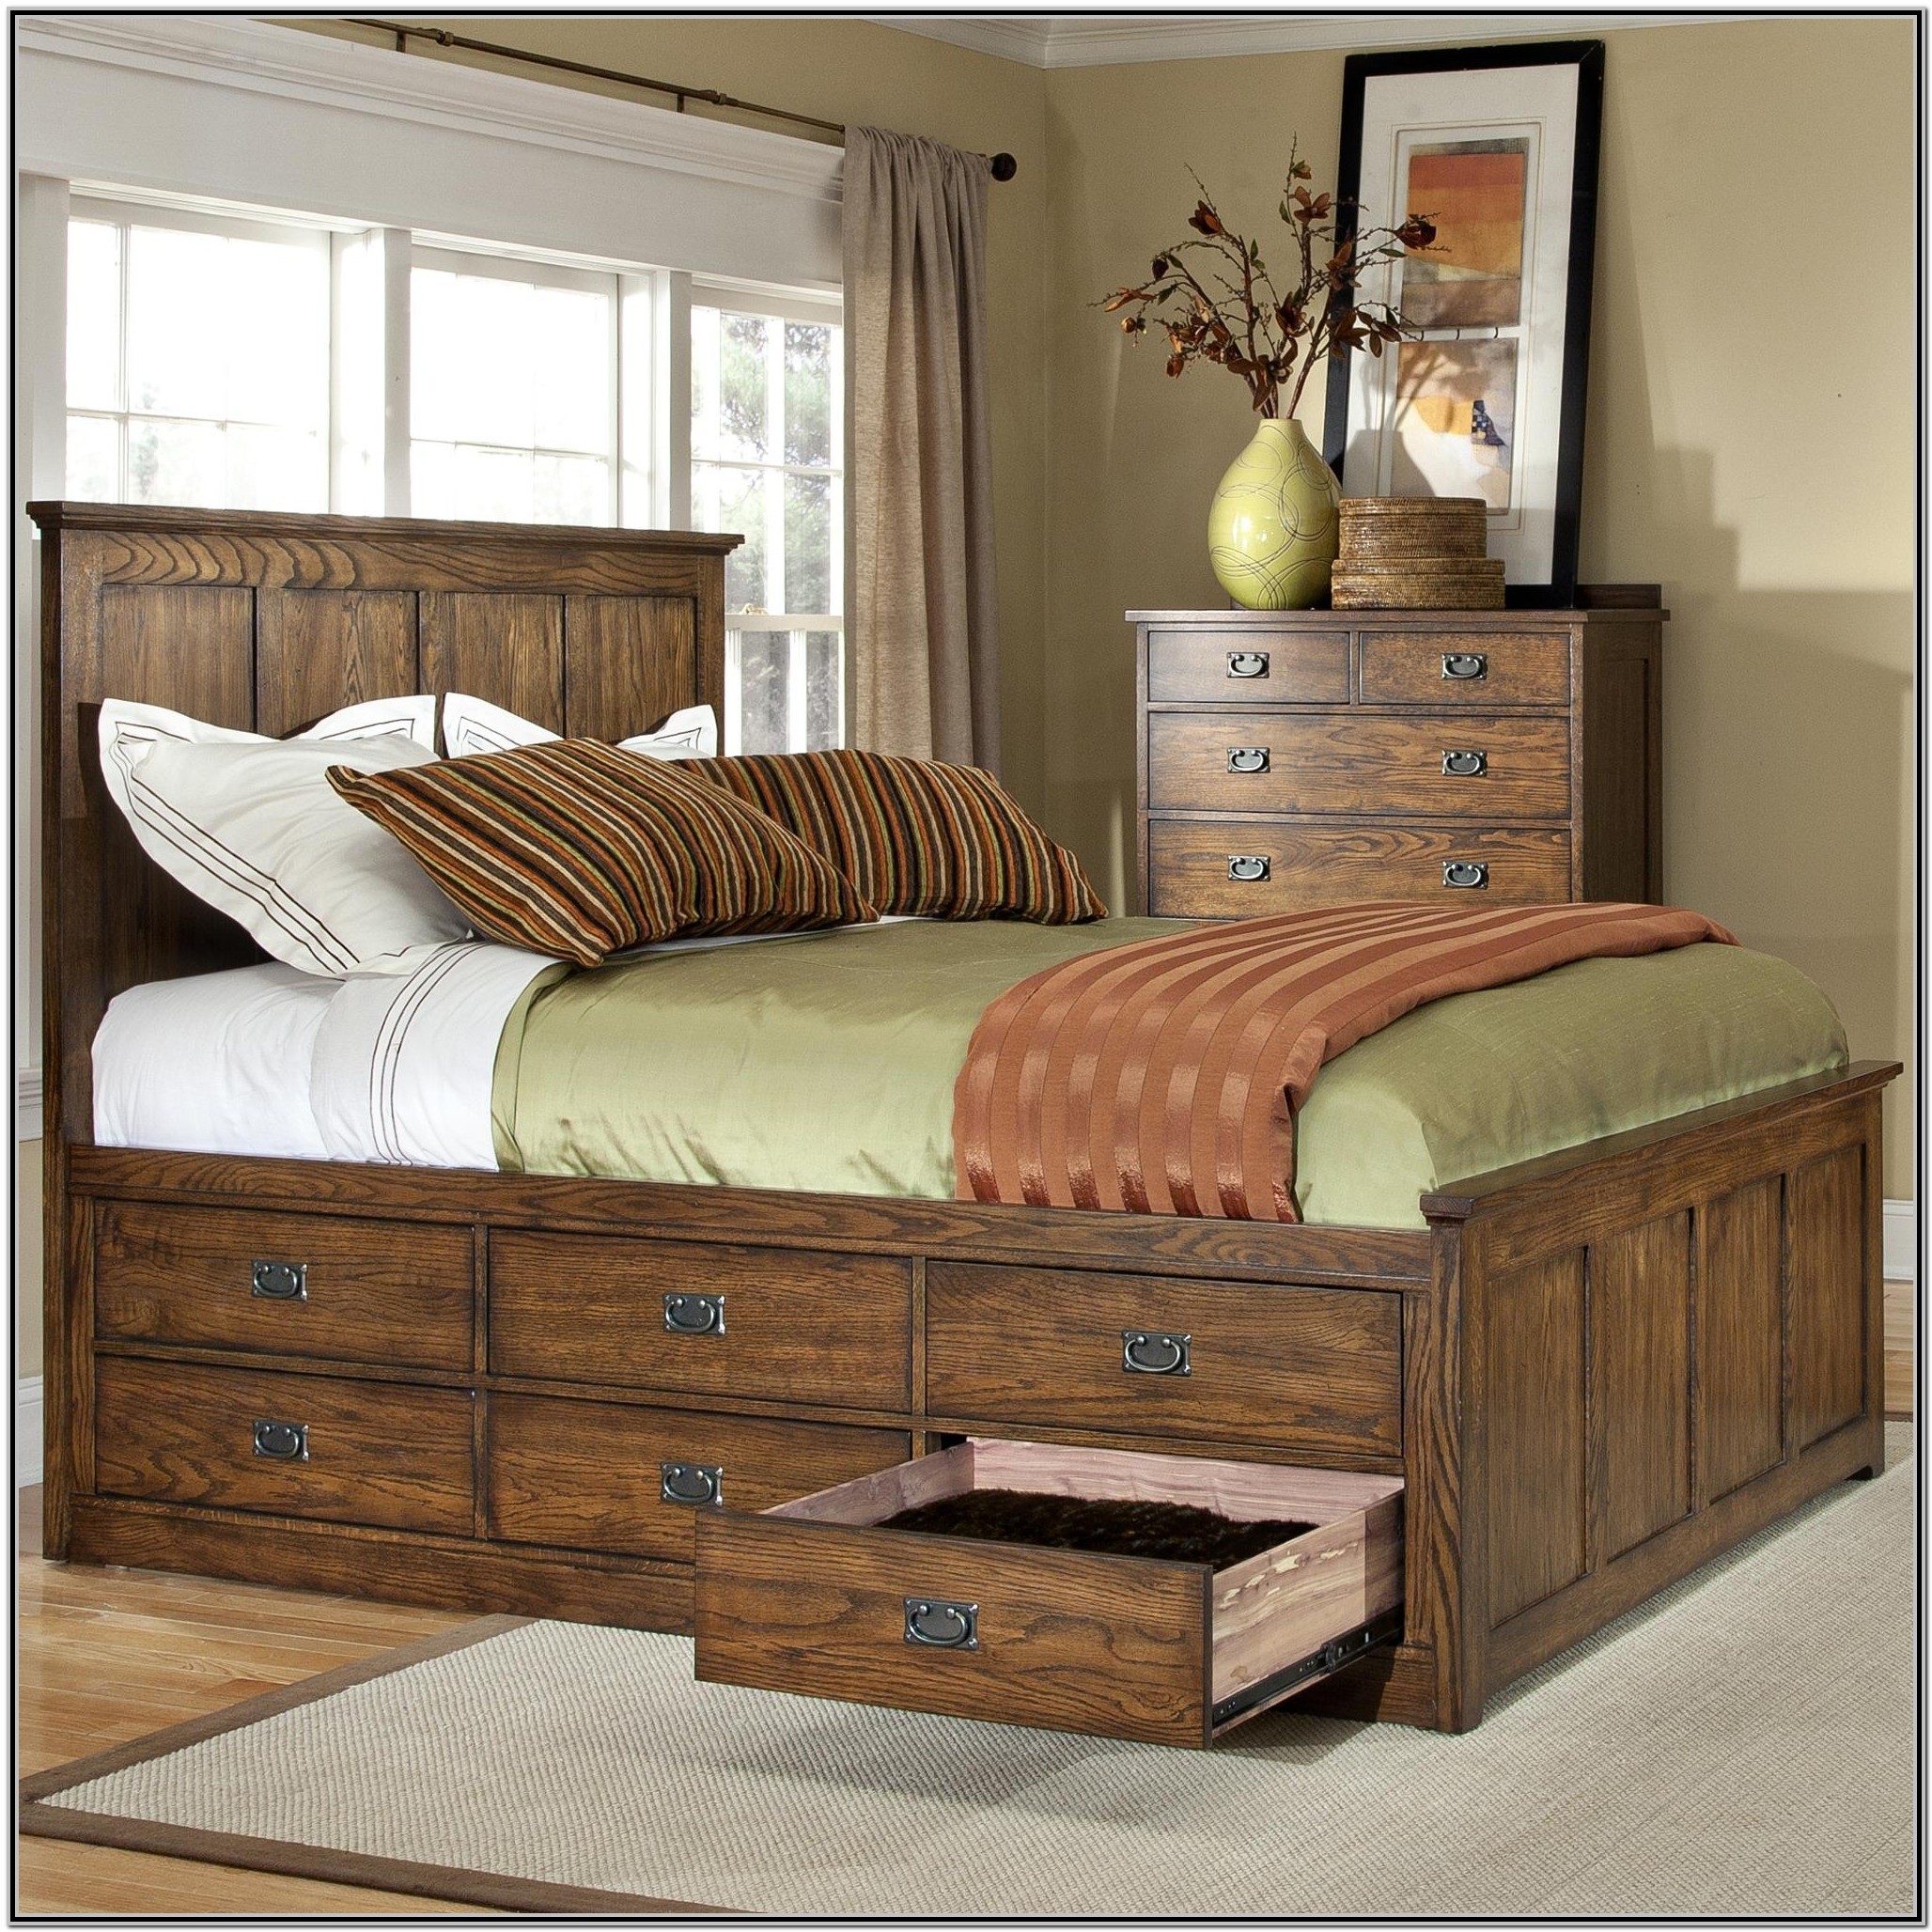 Captains bed with storage drawers